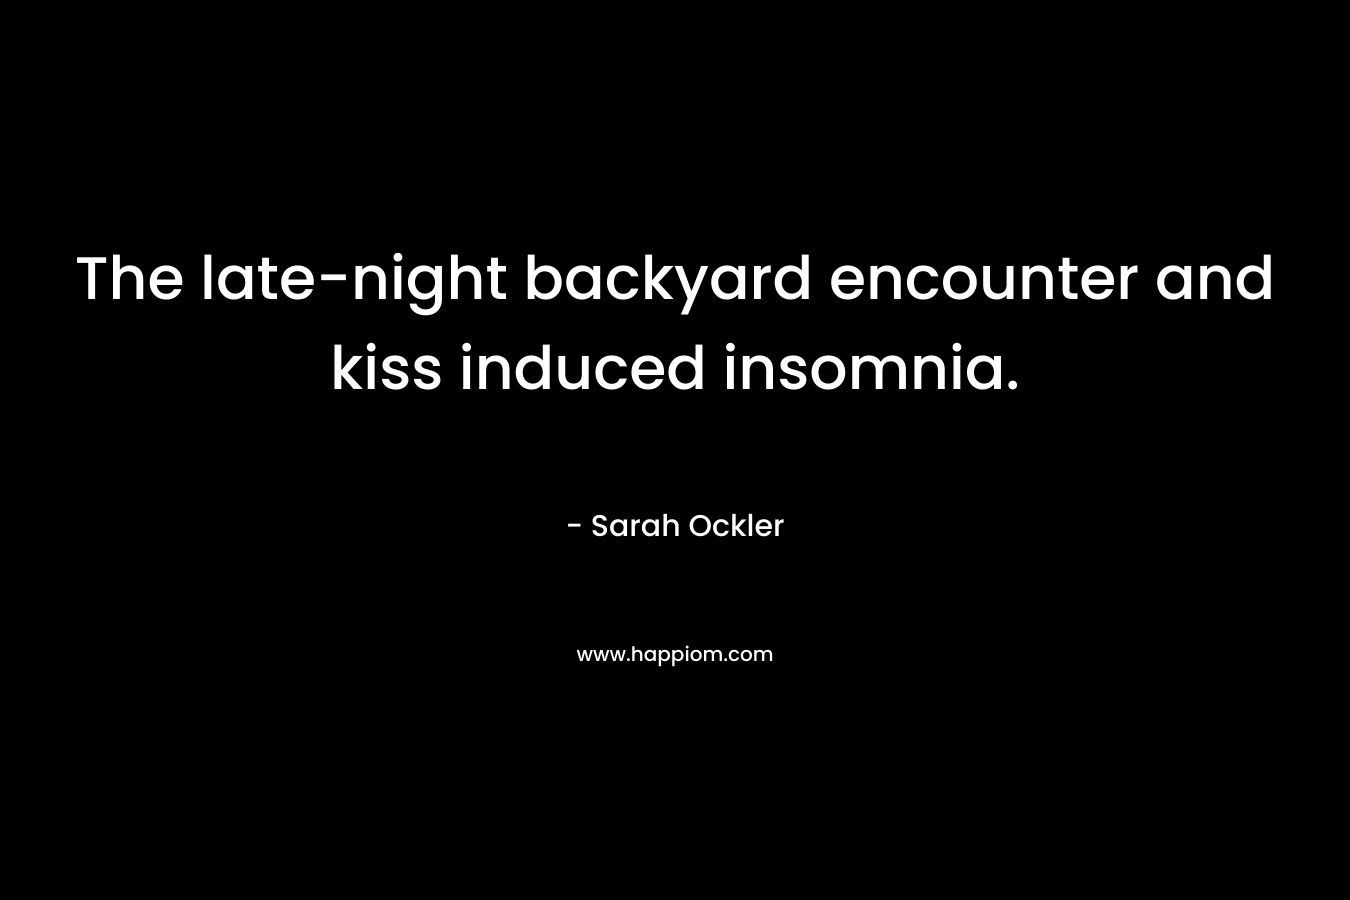 The late-night backyard encounter and kiss induced insomnia.